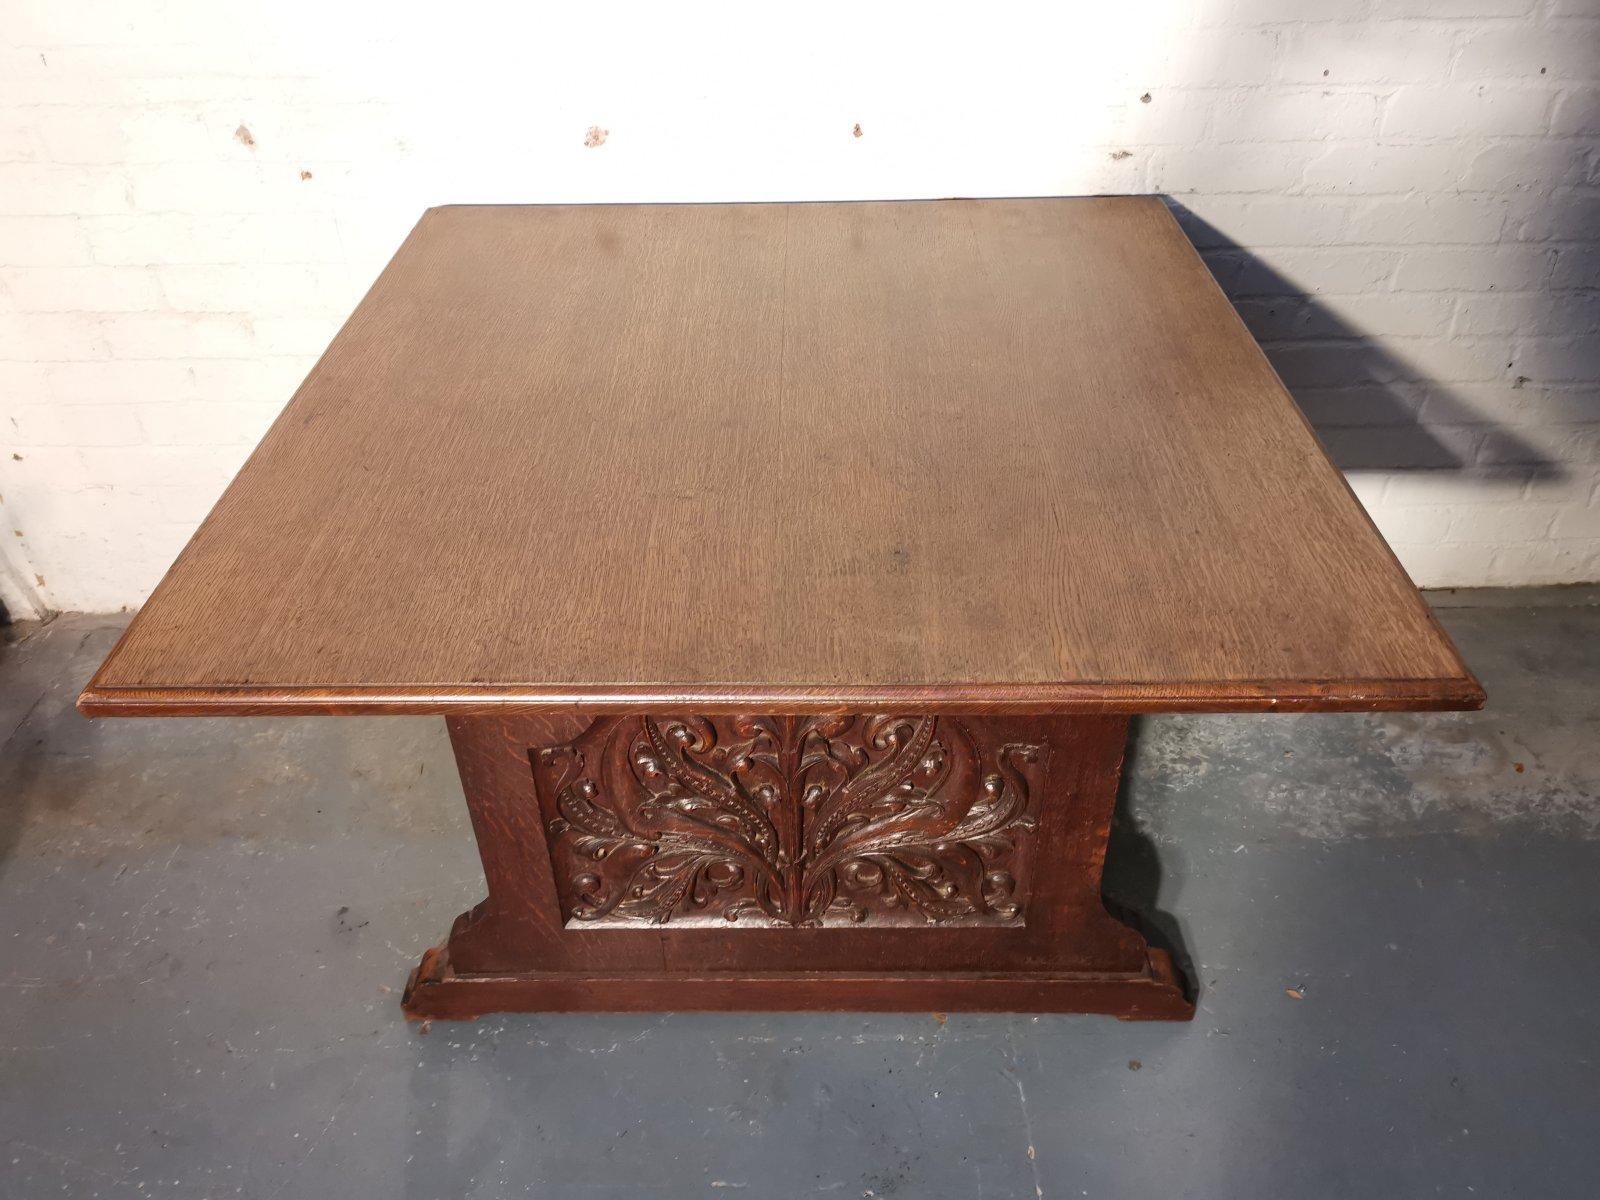 George Jack for Morris and Co. attributed.
An exceptional Arts and Crafts quarter-sawn oak library table/double desk, with a rectangular top and shaped sides united by a floor stretcher with molded details.
Each side with highly skilled carved